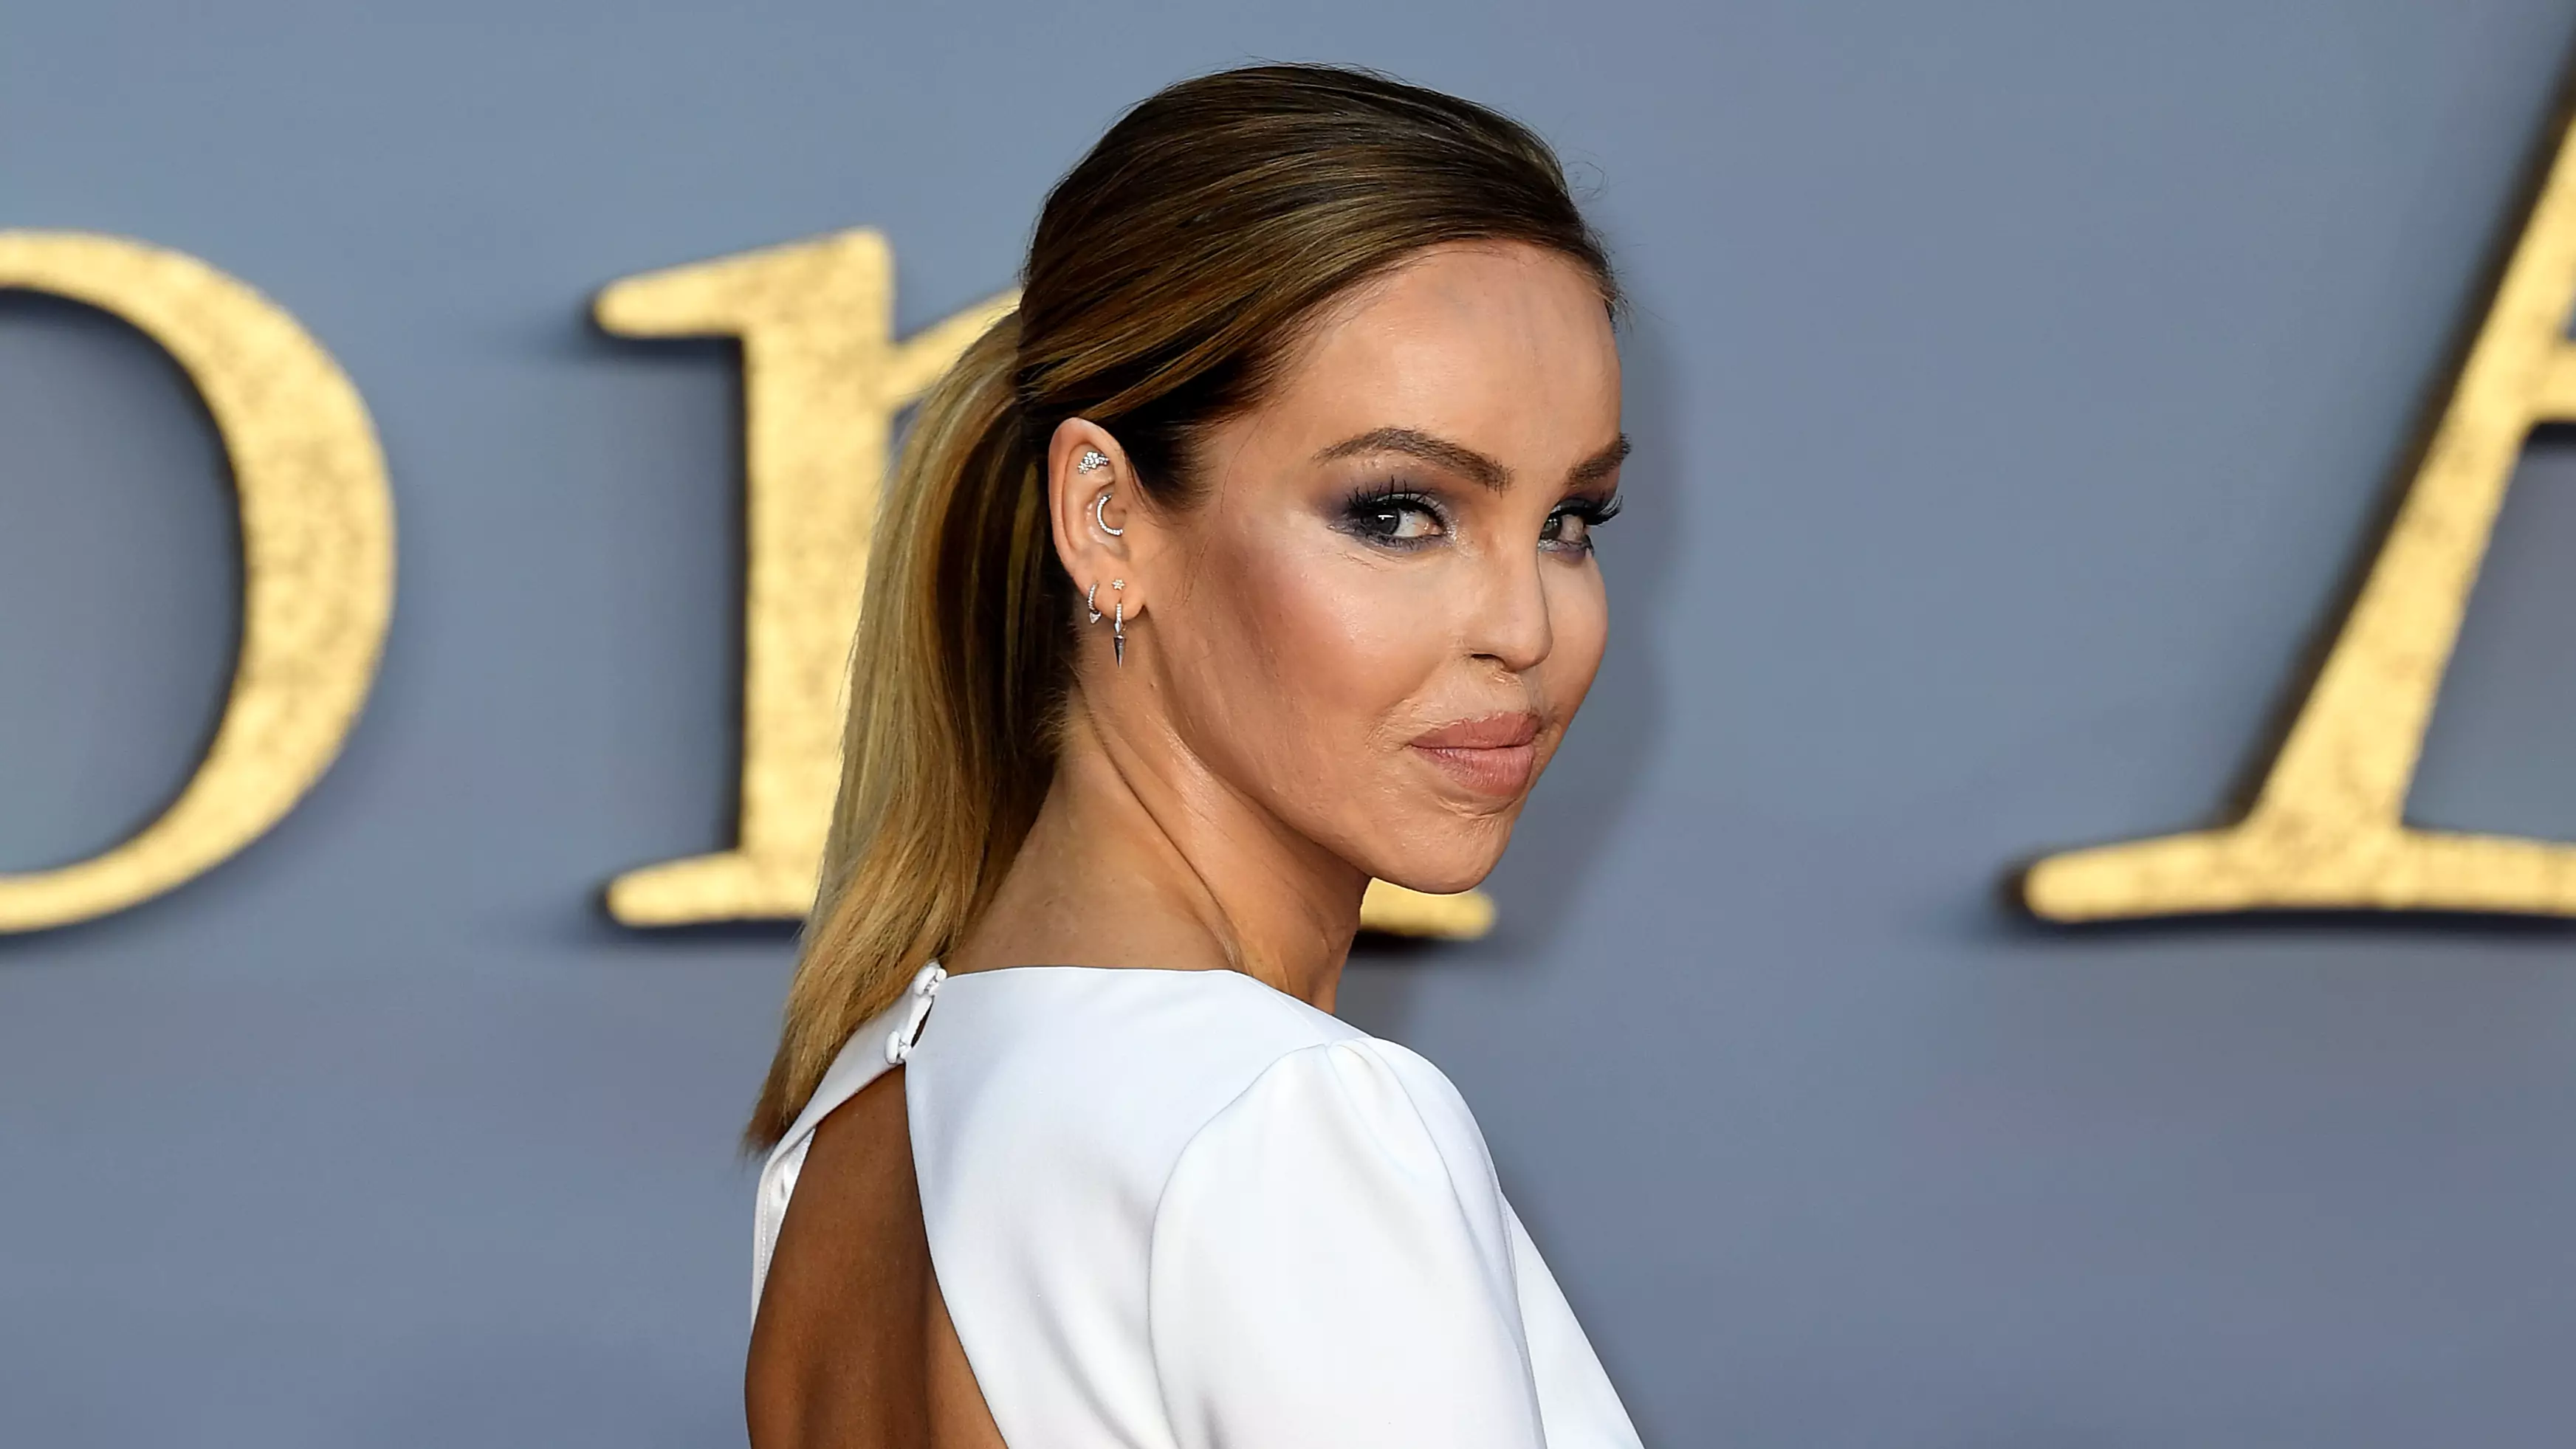 Katie Piper Posts Harrowing Photo Of Her Acid Attack Injuries To Raise Awareness About Mental Health